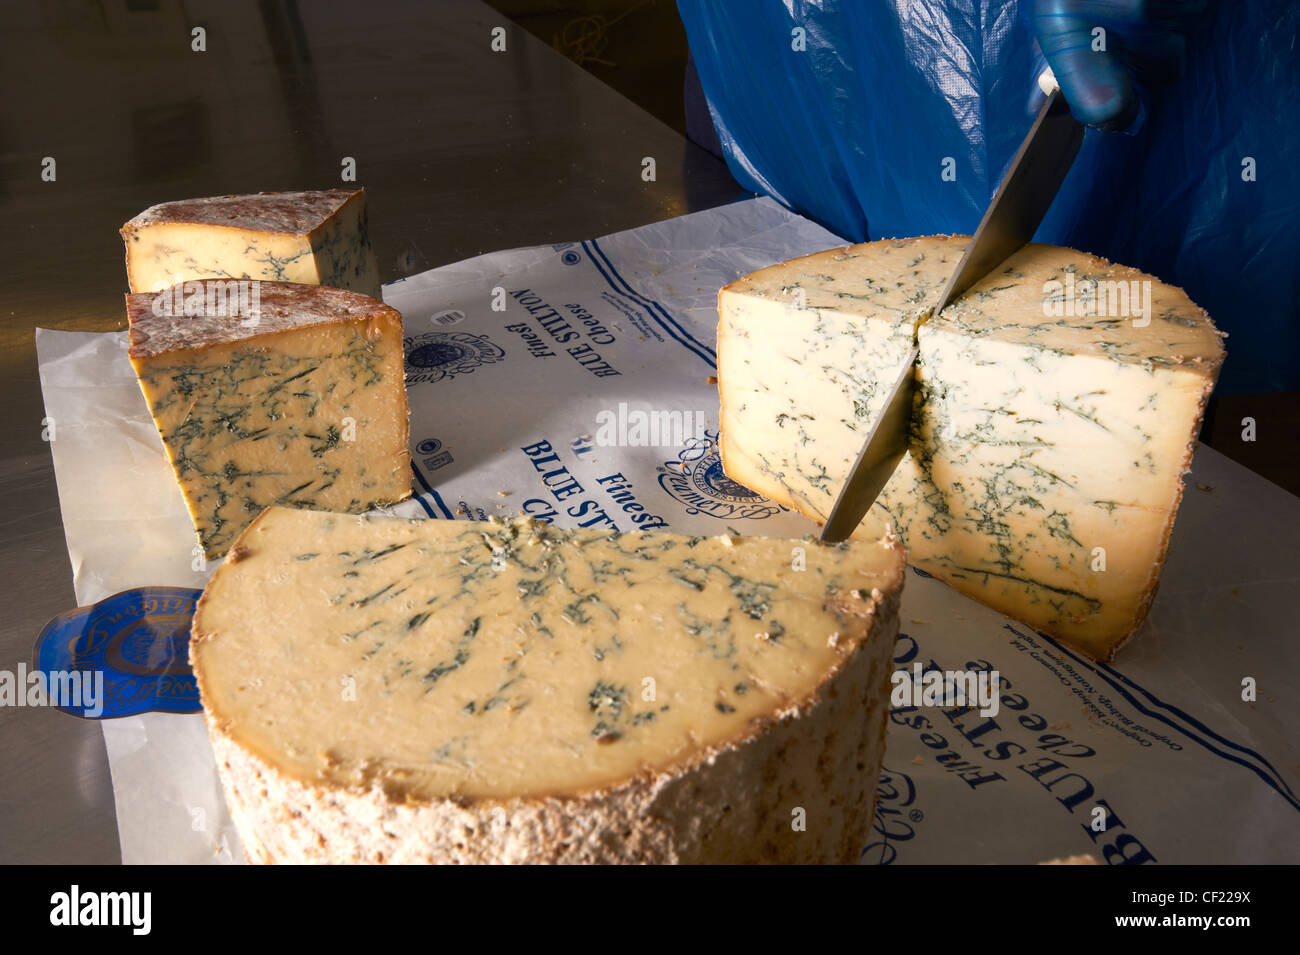 A whole blue stilton cheese being cut into smaller blocks. Stock Photo